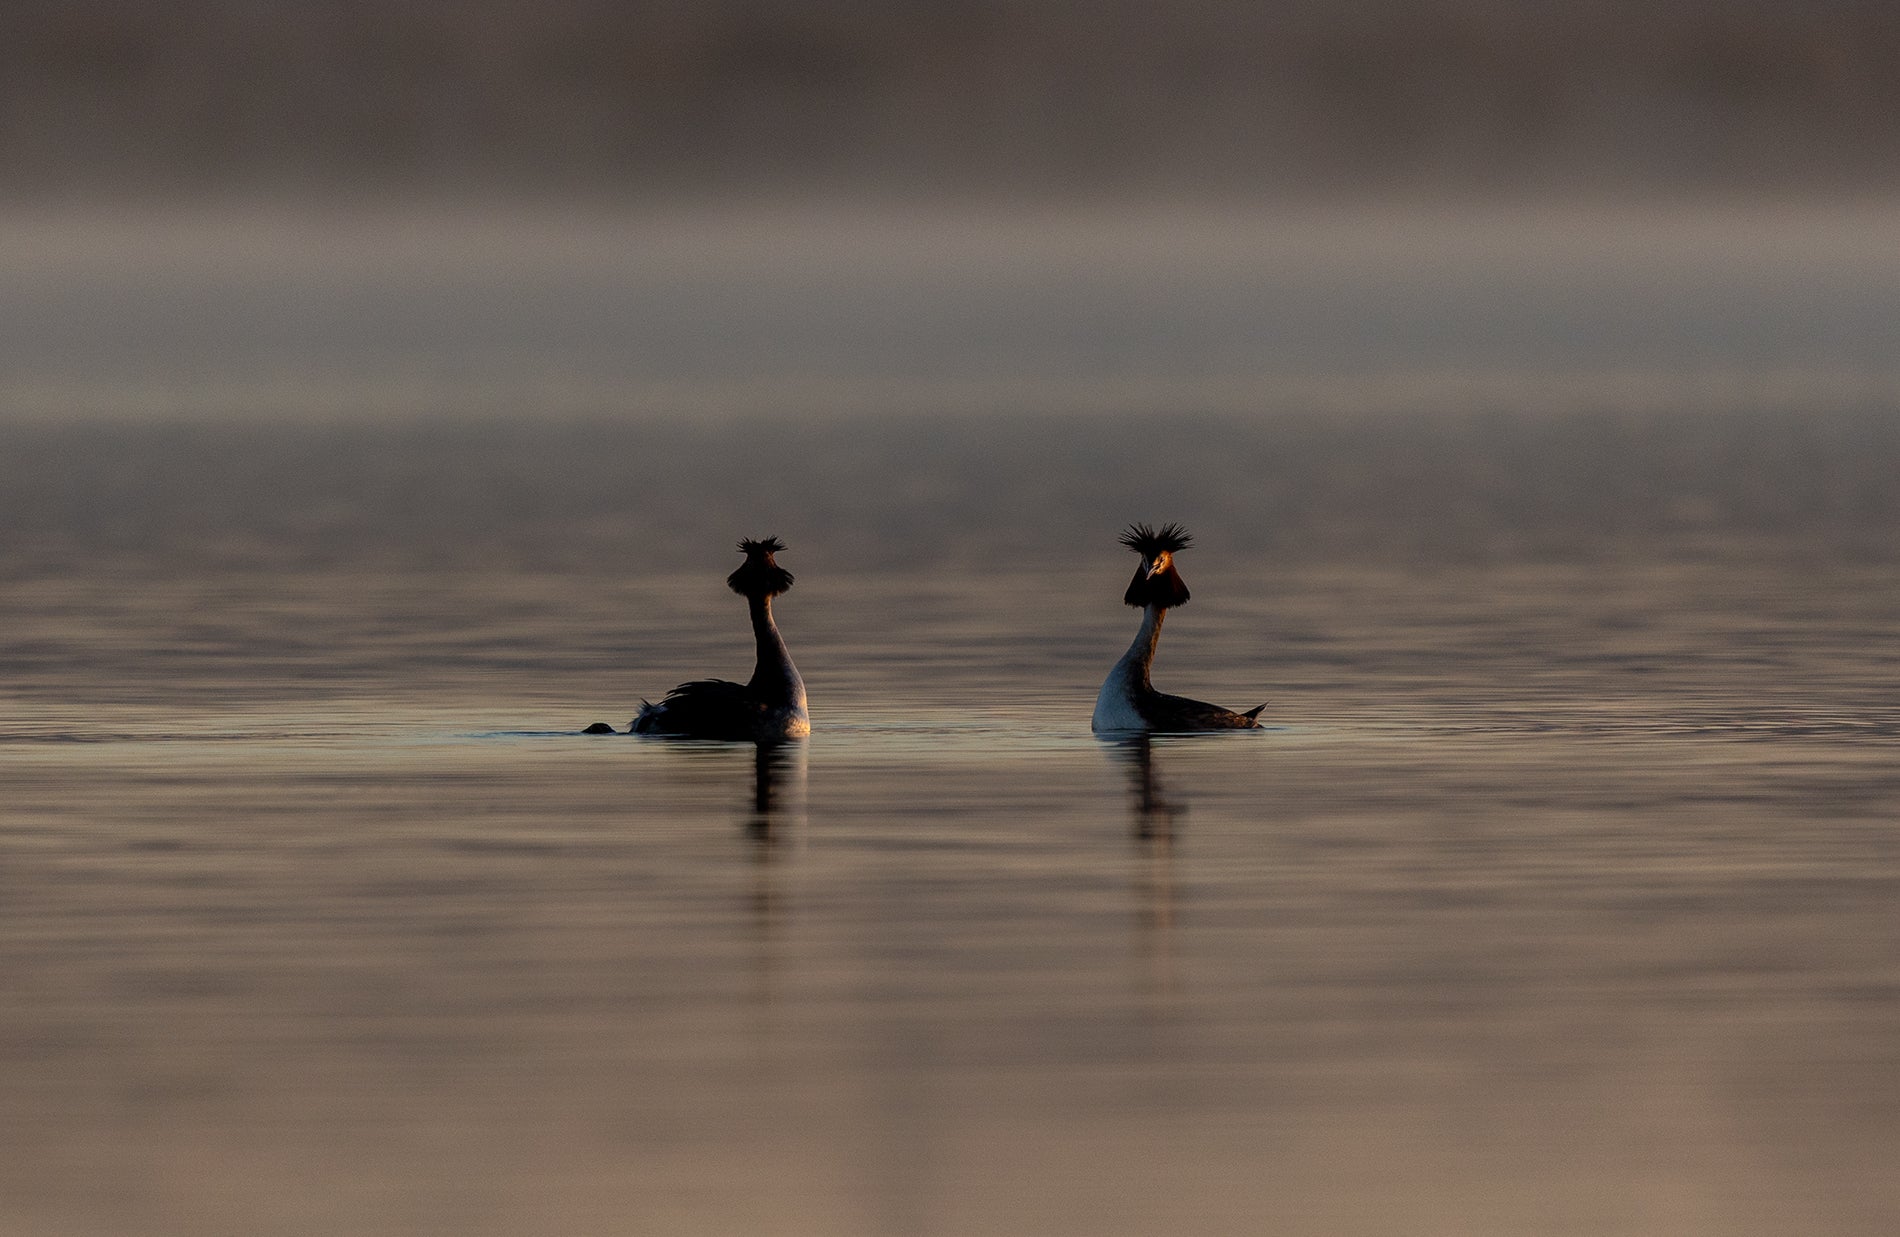 Great Crested Grebes courtship